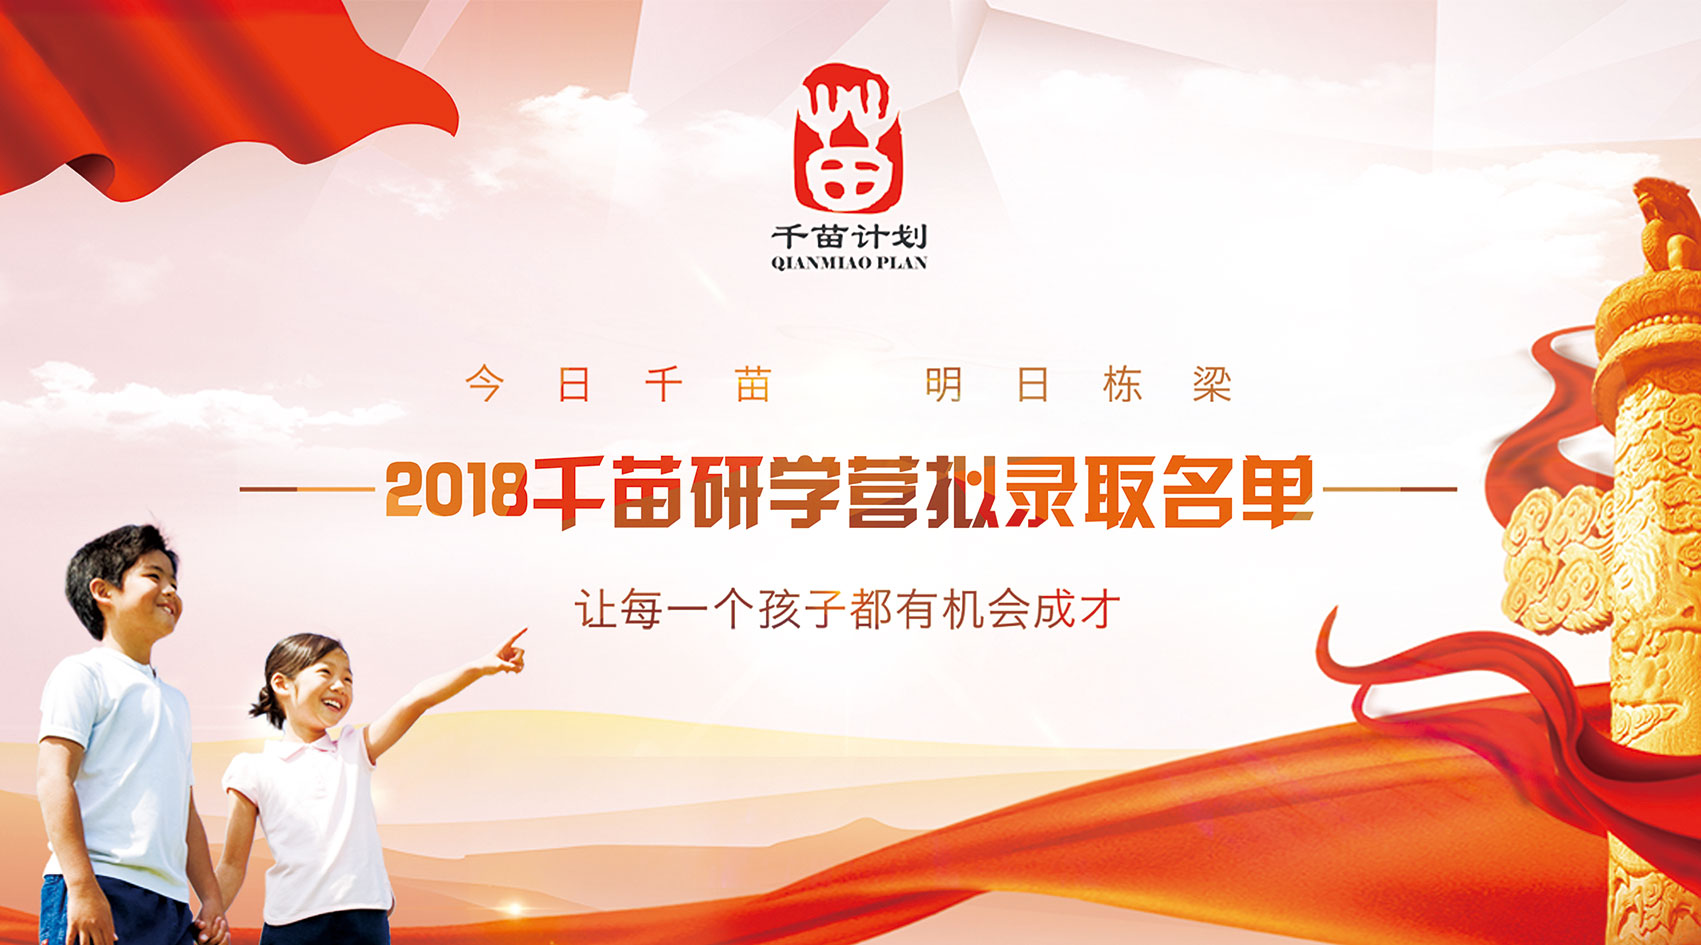 Qianmiao plan 2018 admission list announced